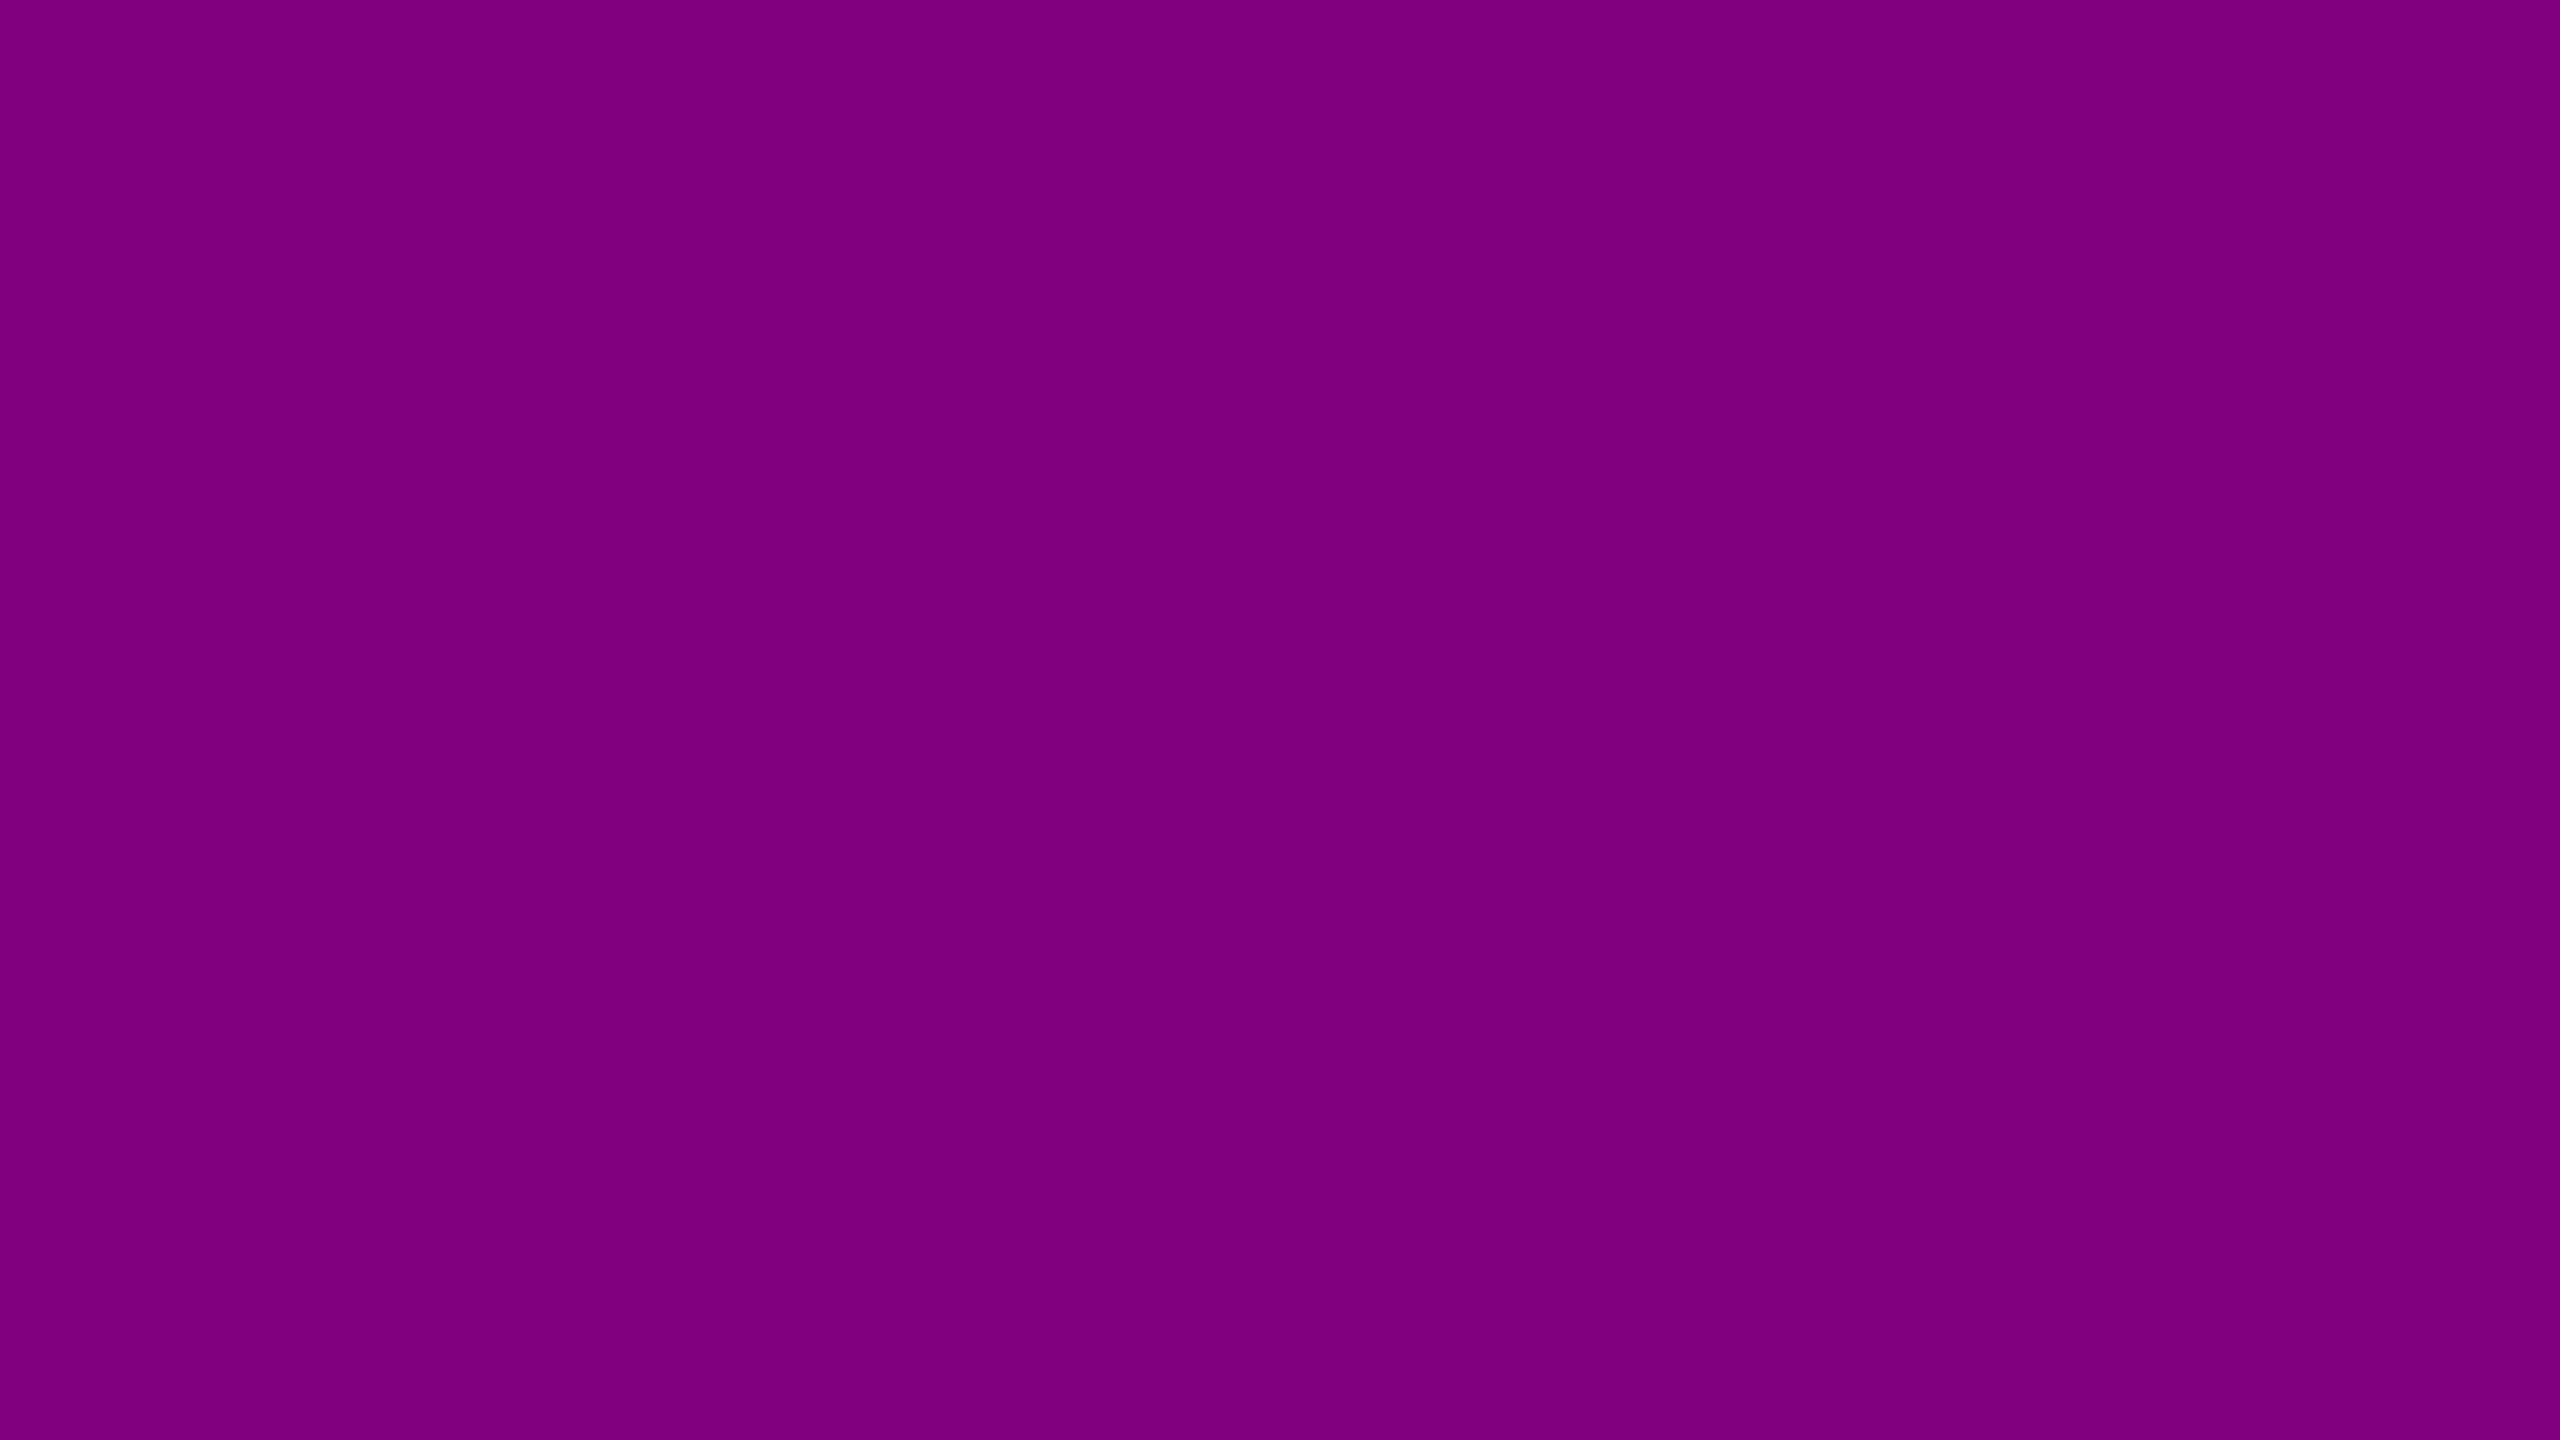 Purple Solid Color Backgrounds The Hippest Pics